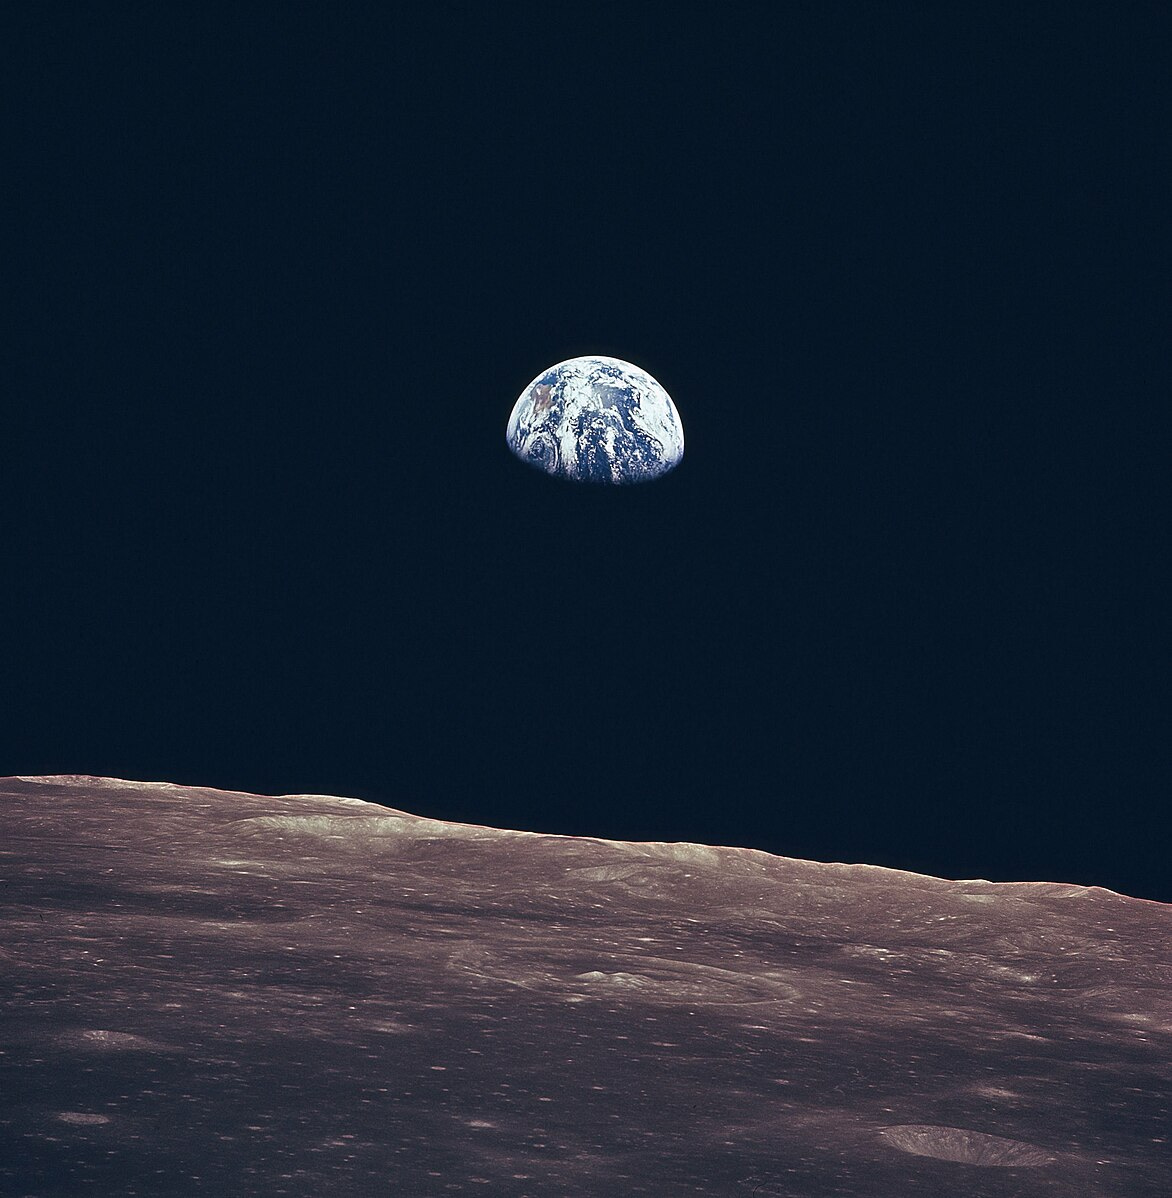 A color photo of the cratered surface of the Moon against a black starless sky. A half-shadowed distant Earth hangs in the sky.